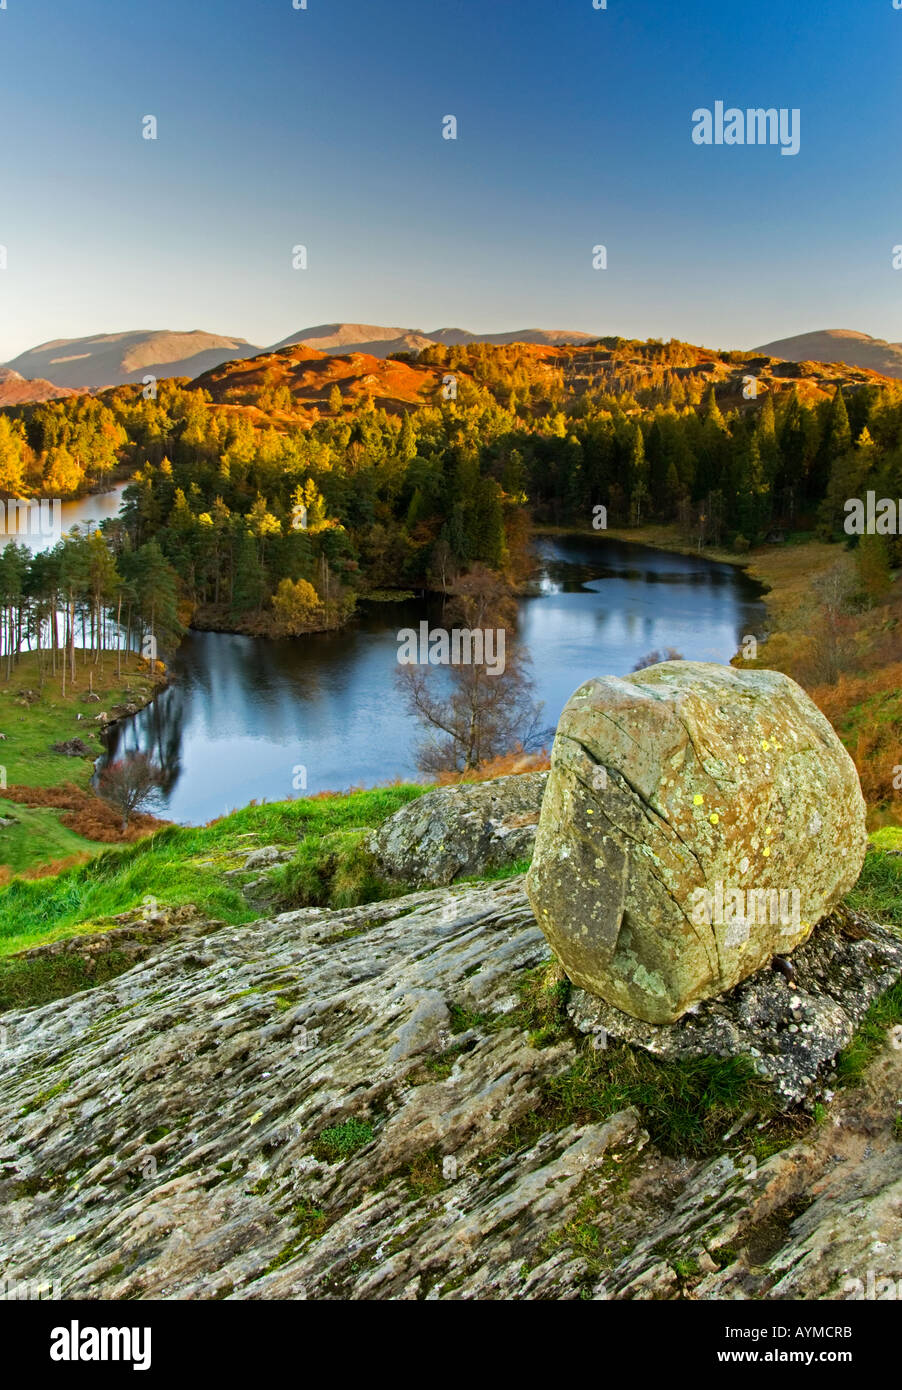 Tarn Hows and the Distant Helvellyn Fells in Autumn, The Lake District National Park, Cumbria, England, UK Stock Photo